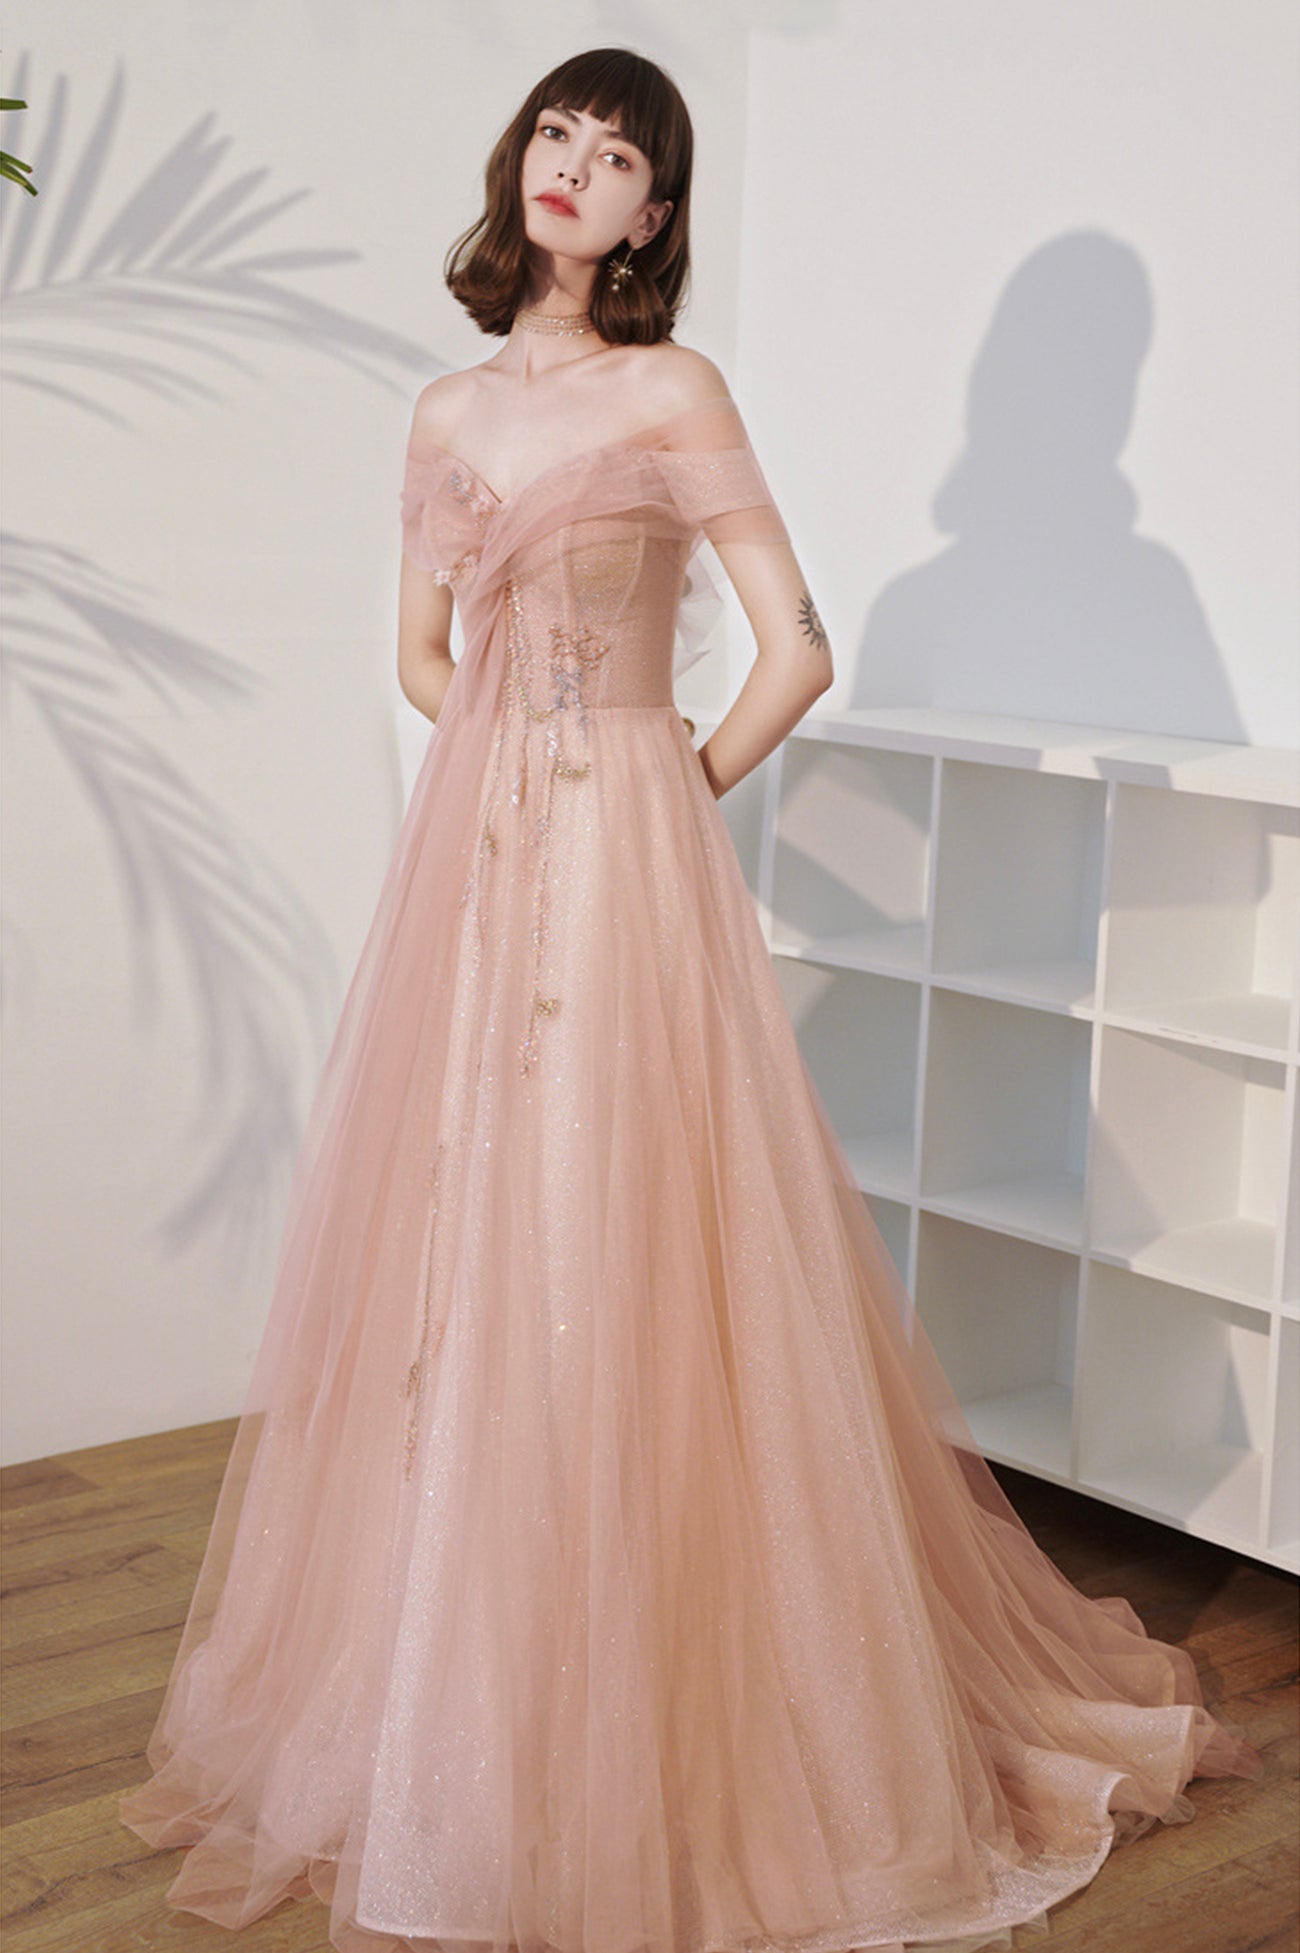 Pink Off the Shoulder Tulle Long Prom Dress, Cute A-Line Evening Dress